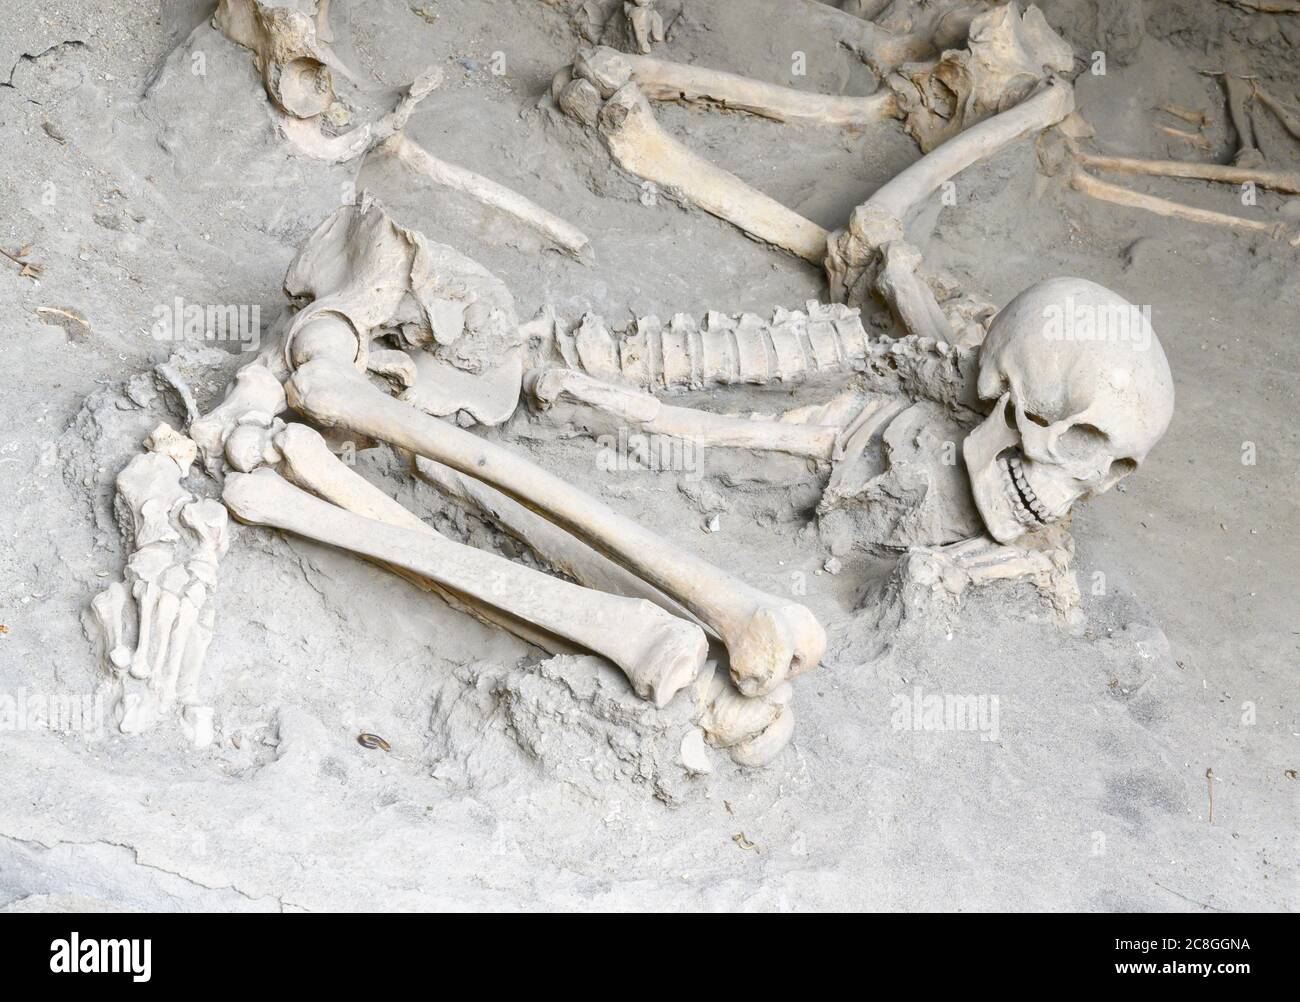 Skeletons of people killed by the eruption of Vesuvius in AD 79 found where they were sheltering in the Roman city of Herculaneum, Bay of Naples Stock Photo